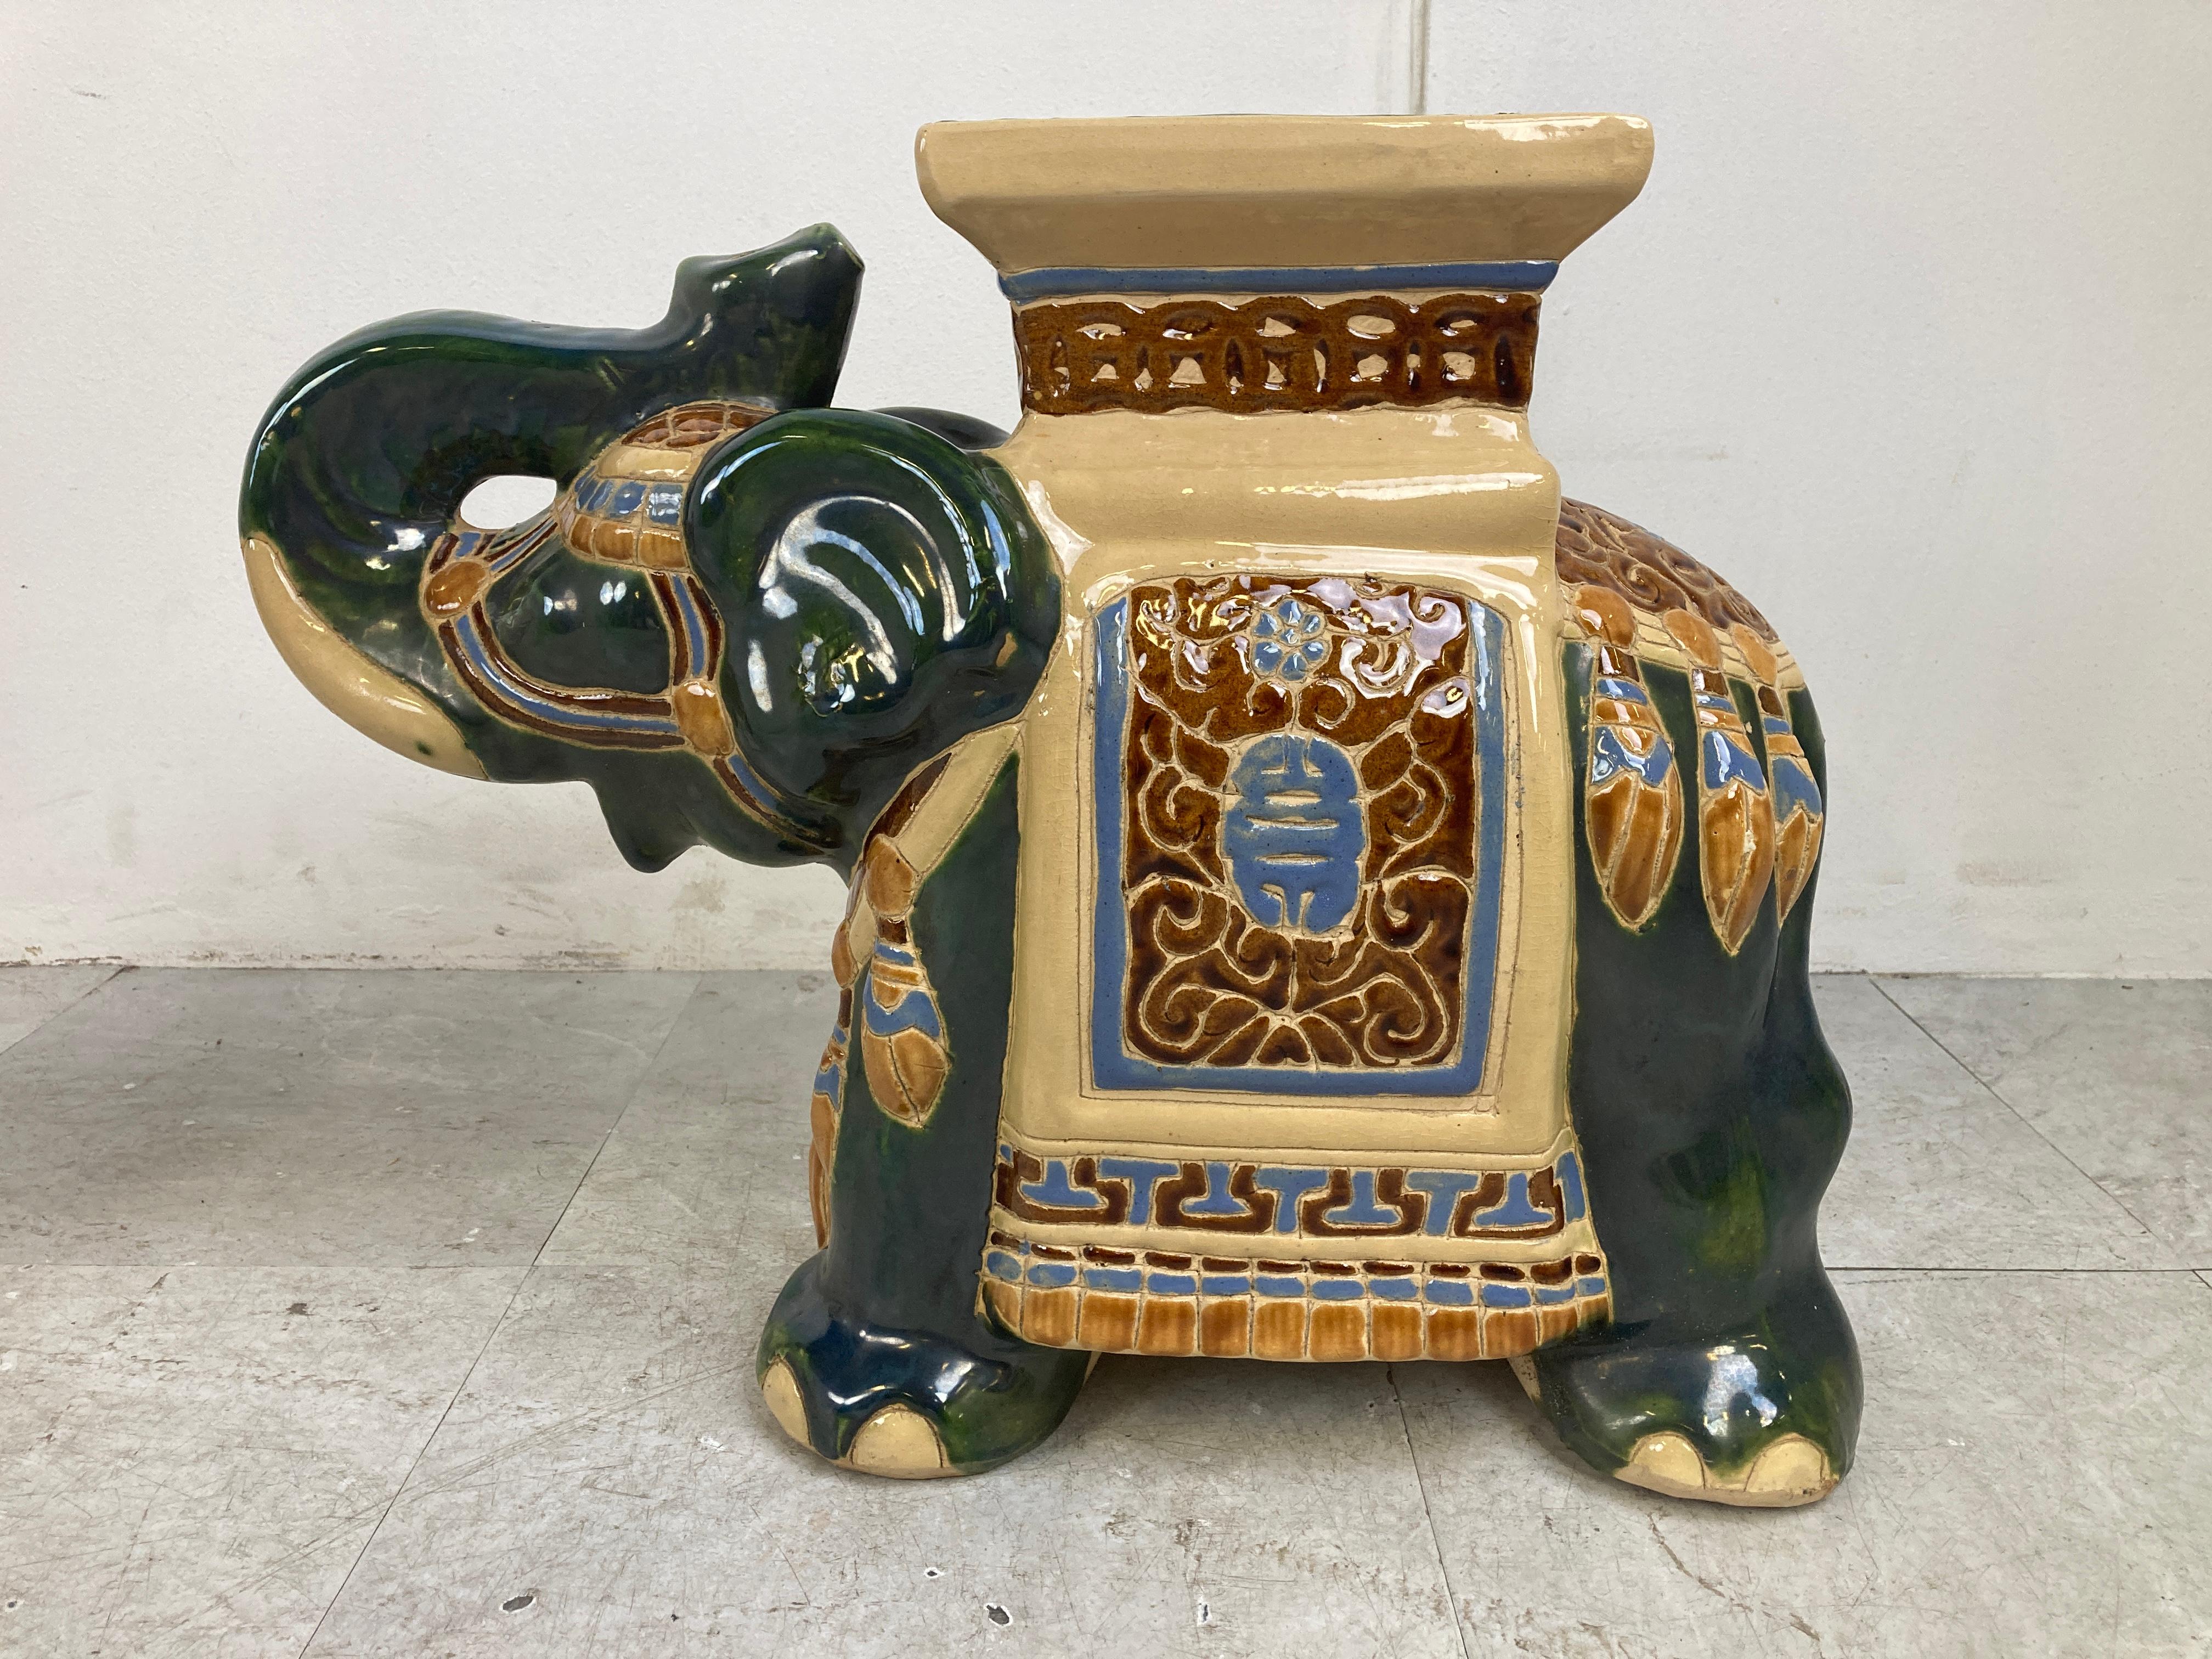 Very decorative midcentury chinoiserie glazed ceramic elephant plant stands.

Can also be used as little side tables or just decor.

Beautifully coloured ceramic sculptures which look great as a pair.

1960s - Italy

Very good